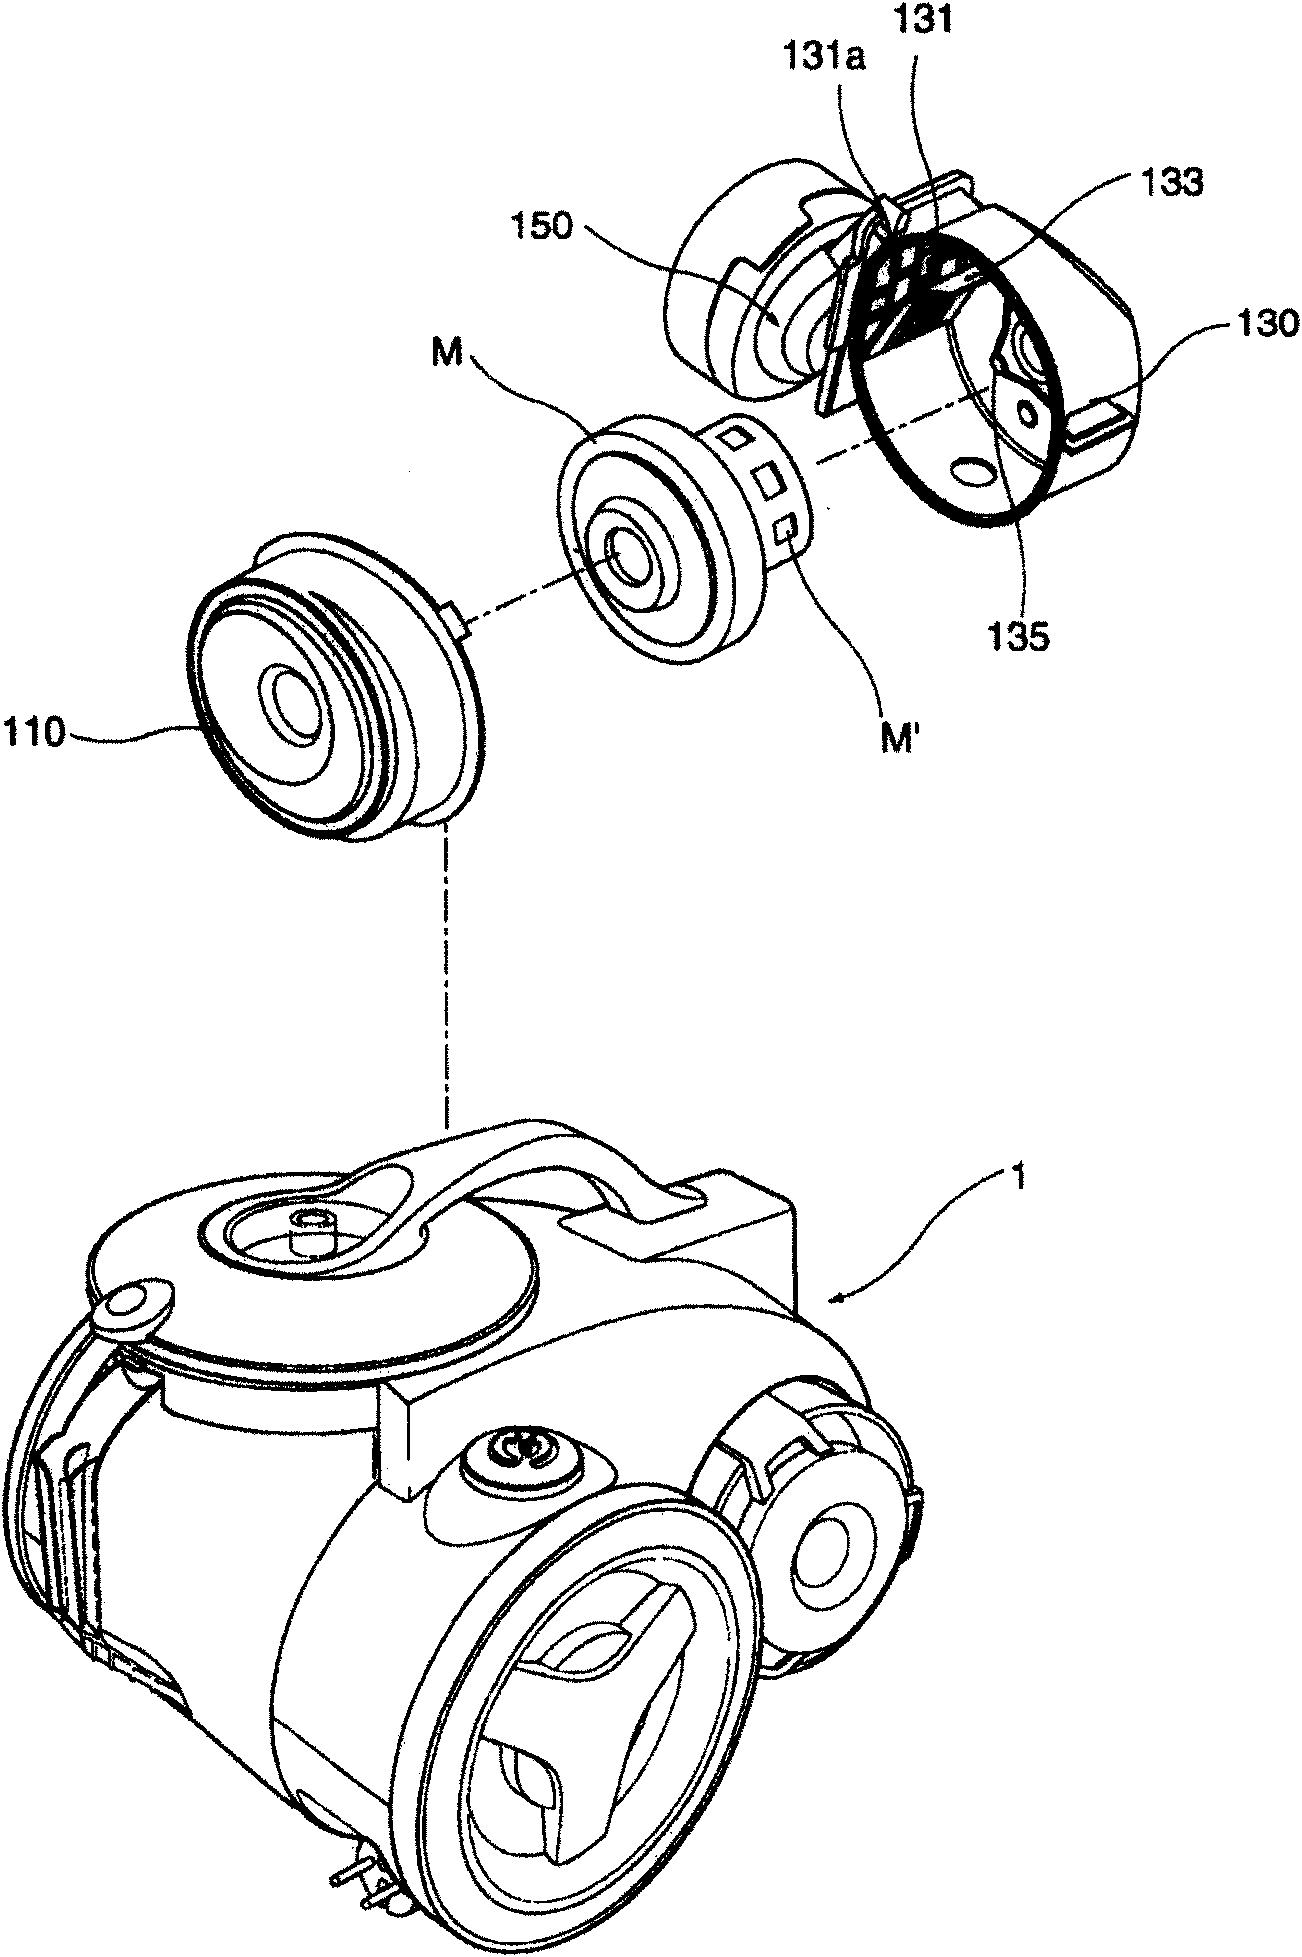 Motor casing with spiral airflow chamber